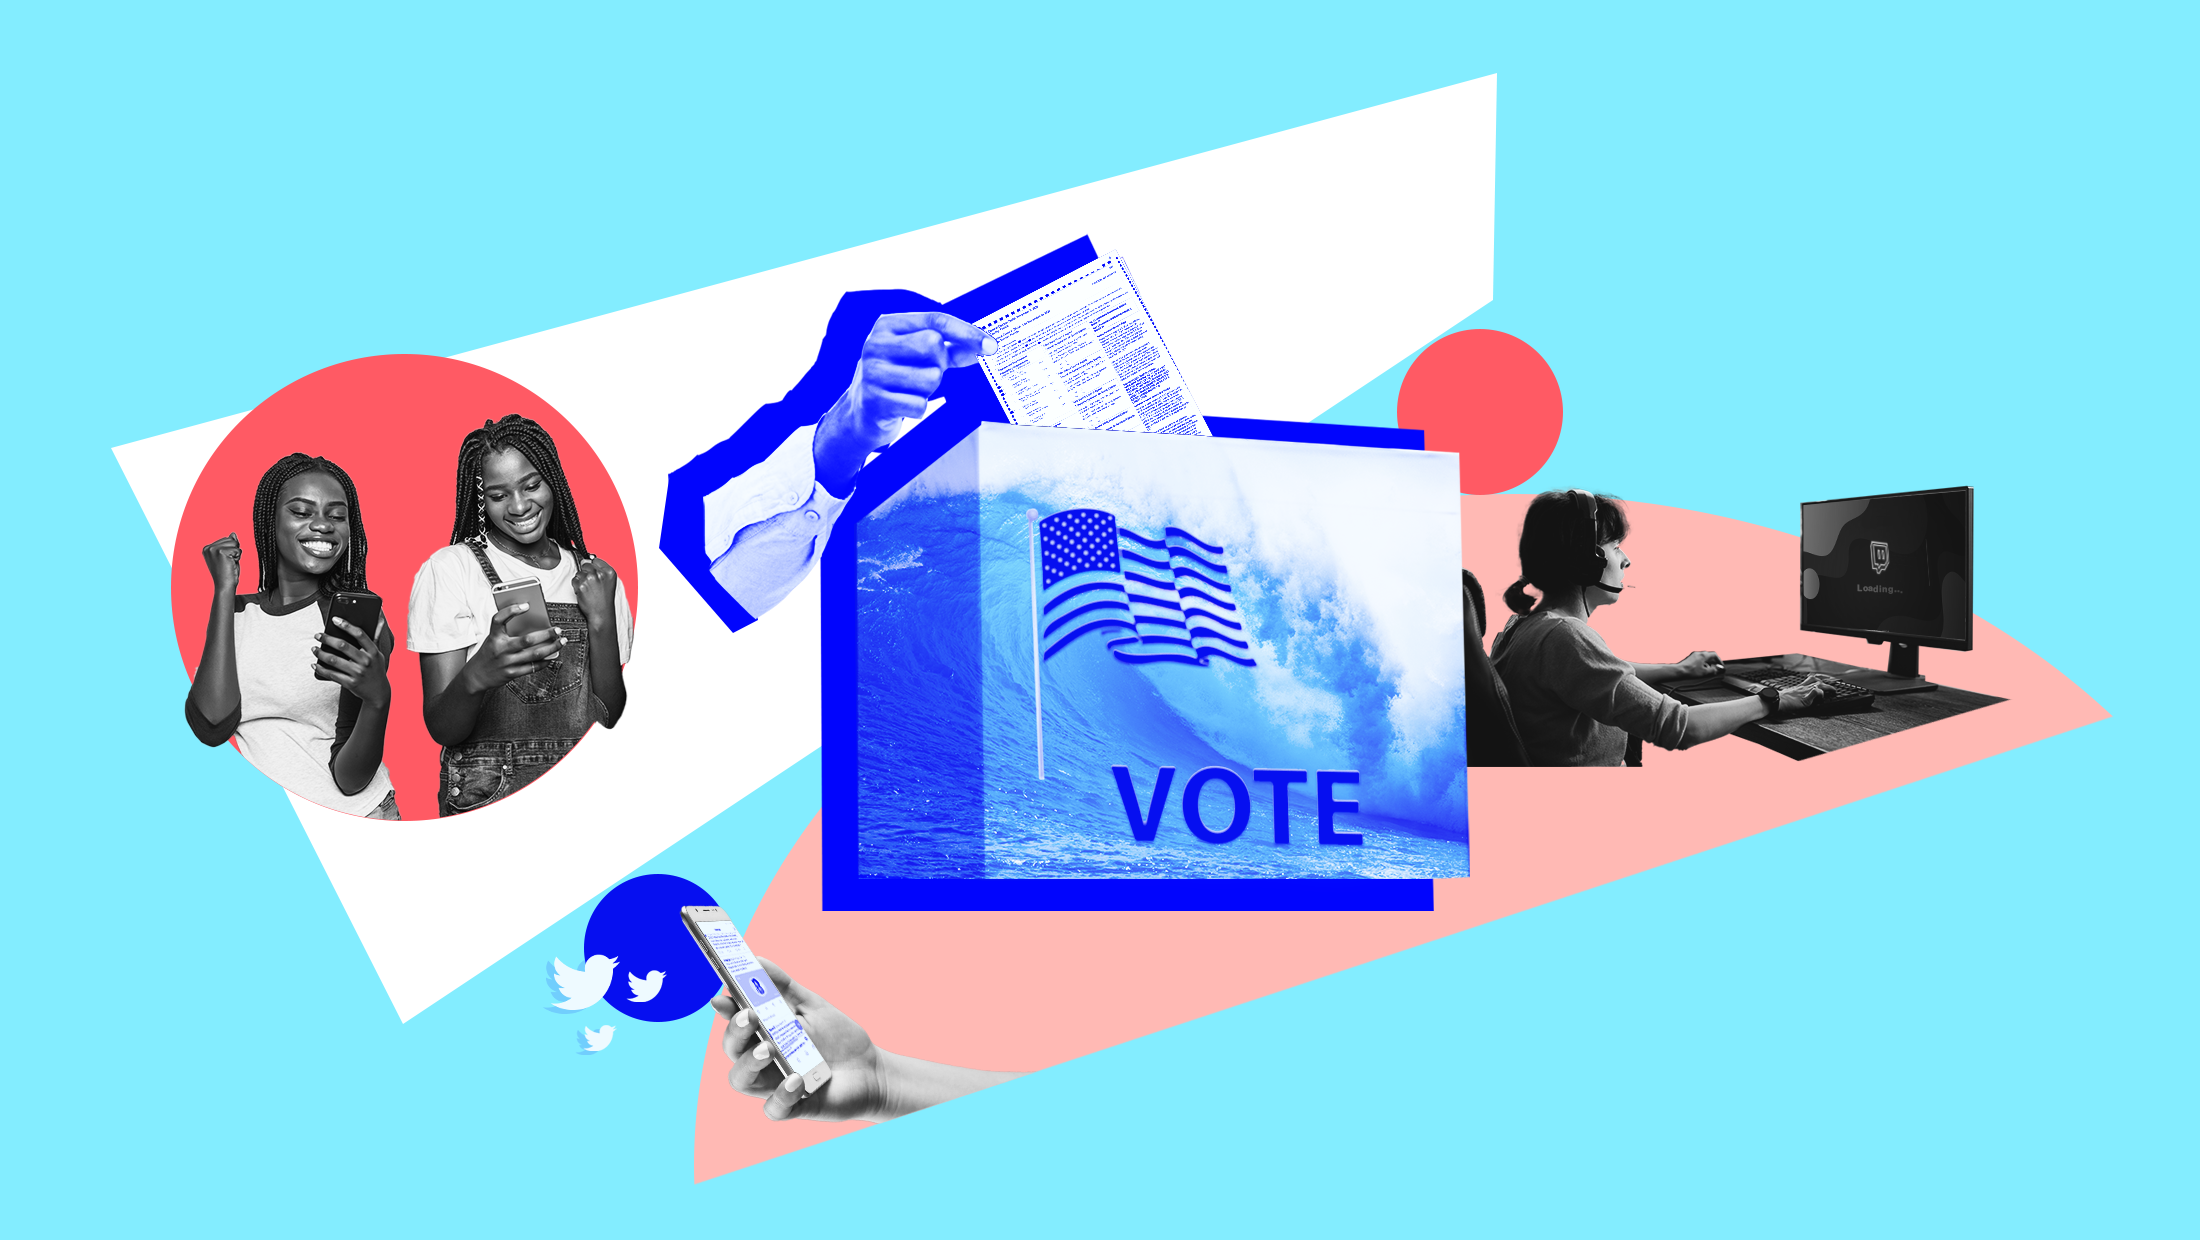 Light blue background with image of blue wave, an American flag and the word "VOTE" laid over a ballot box and someone inserting their ballot into the box, images of two people looking at their phones, an image of someone with a headset on a computer displaying the Twitch logo and another image of someone holding their phone with three Twitter logos next to it.